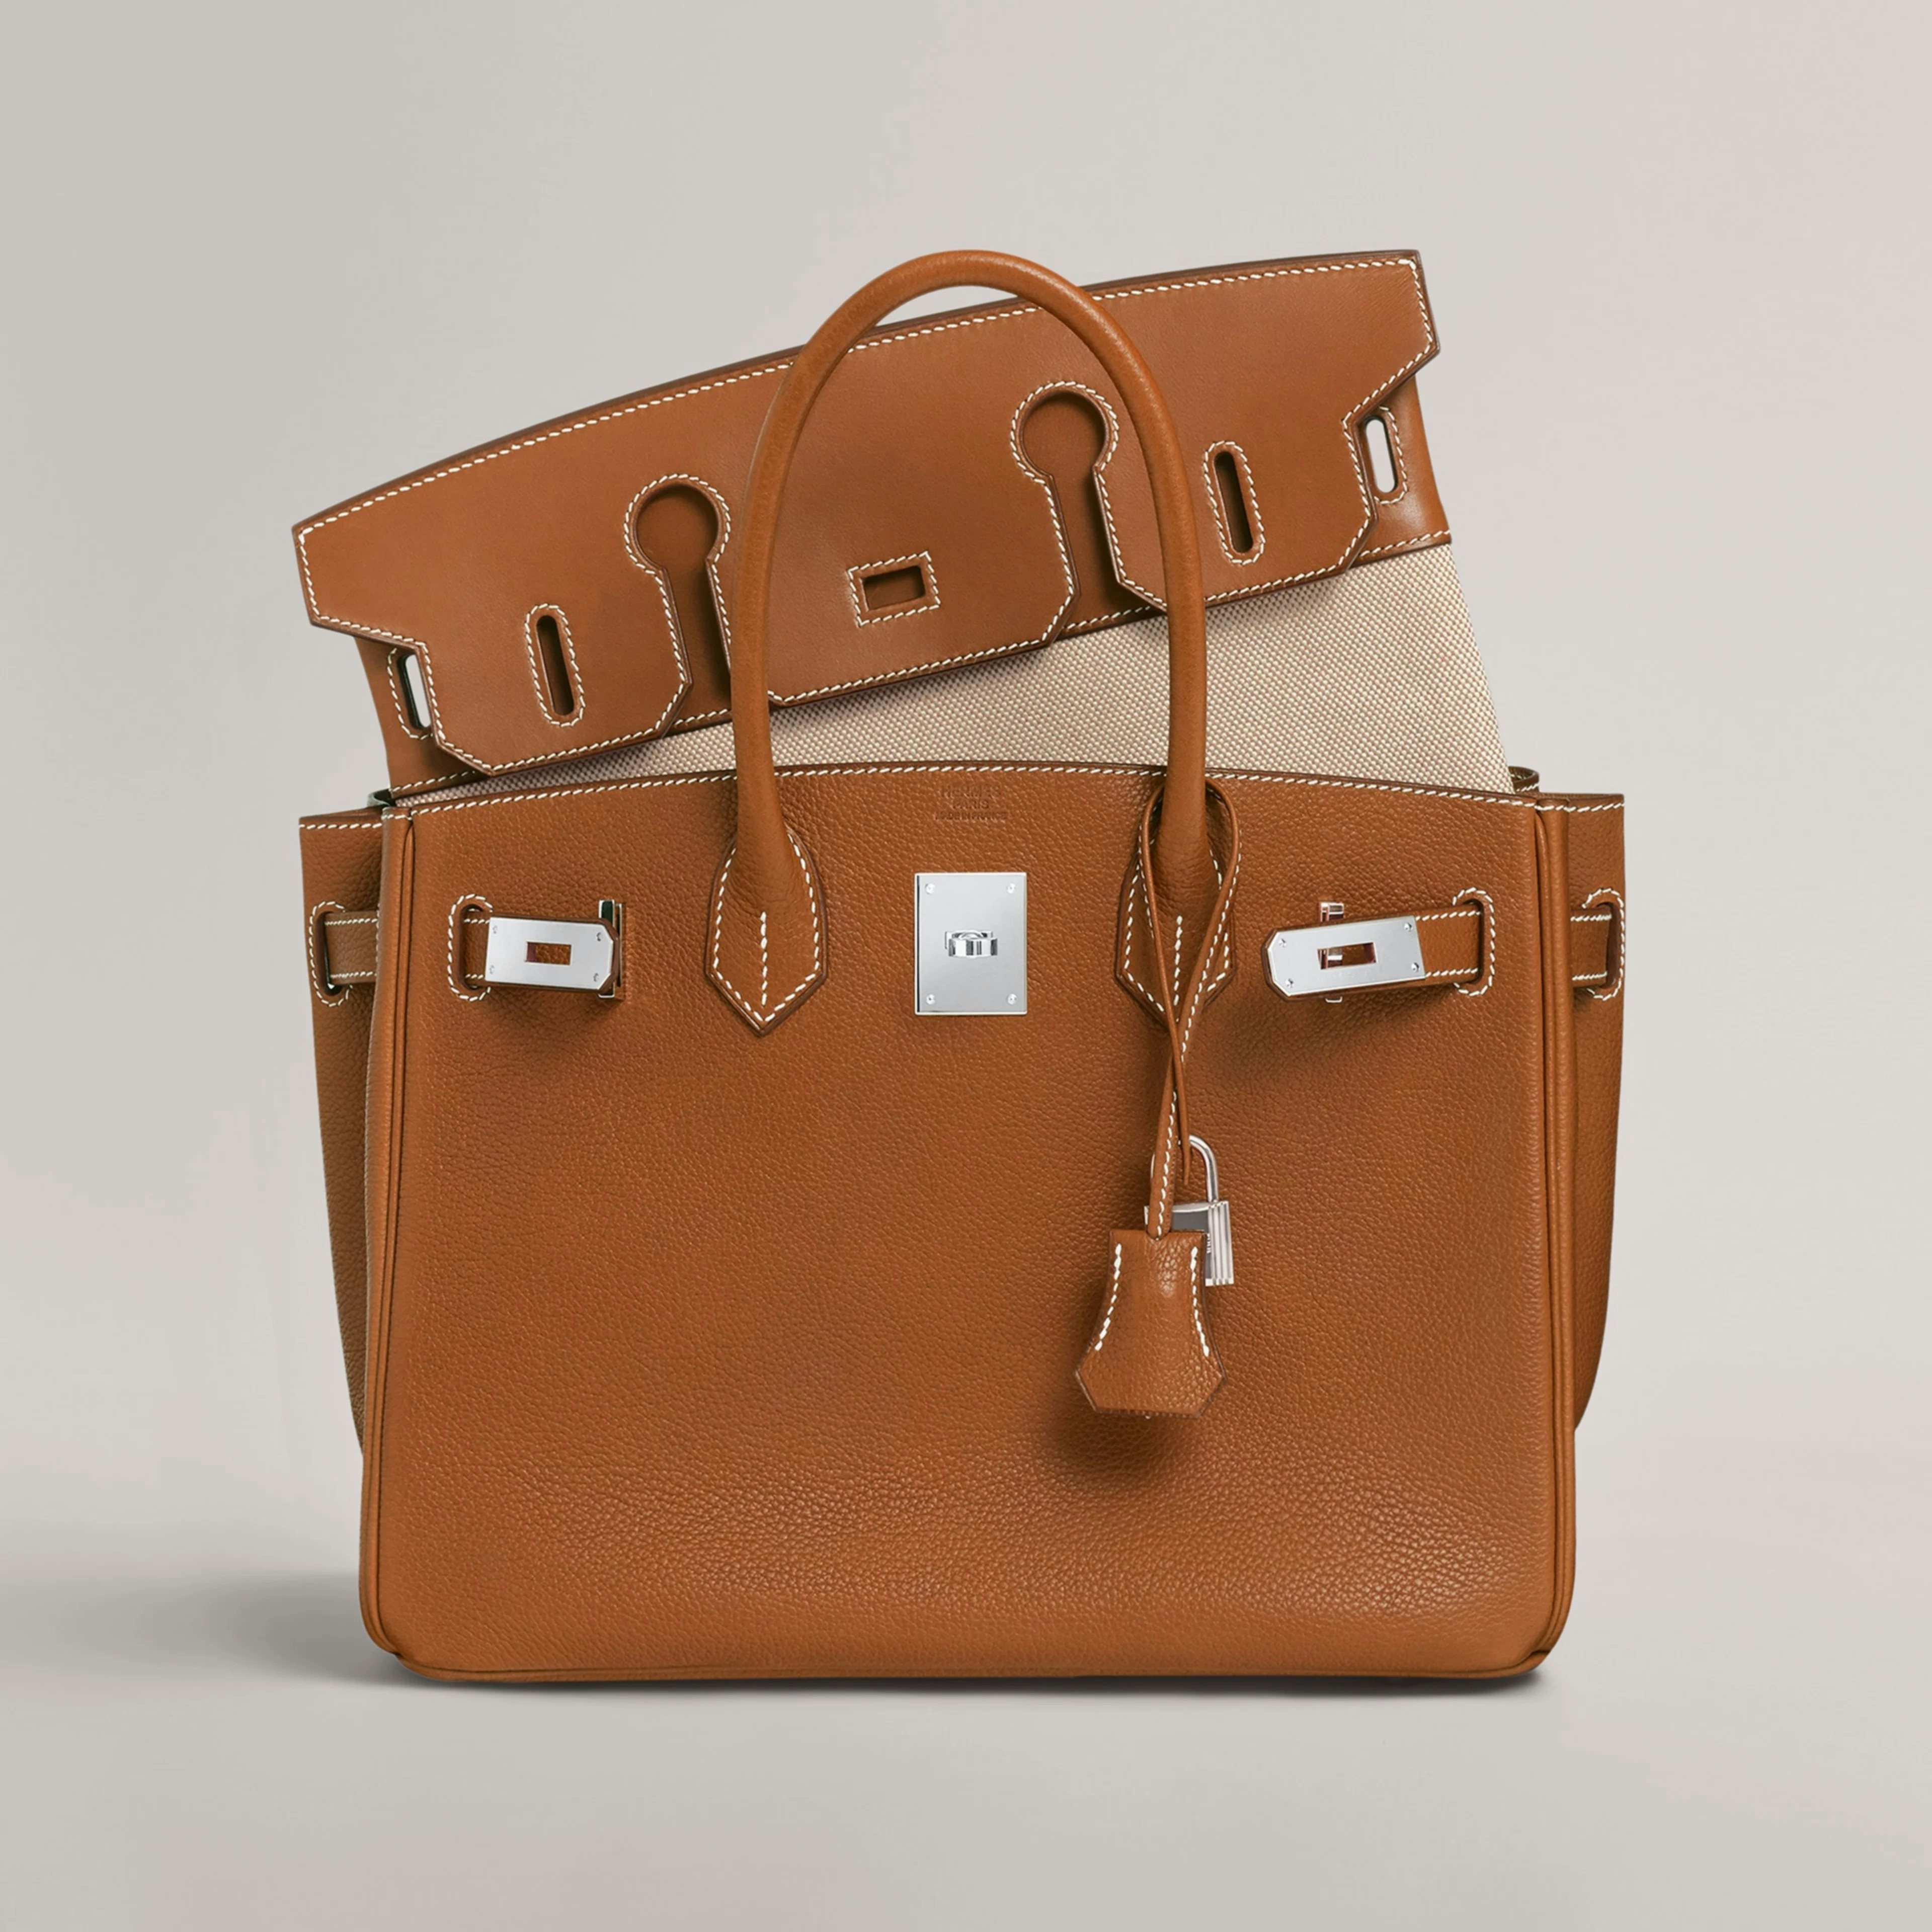 The resale value of Hermès bags in China’s secondary market remains high. Photo: Hermès 